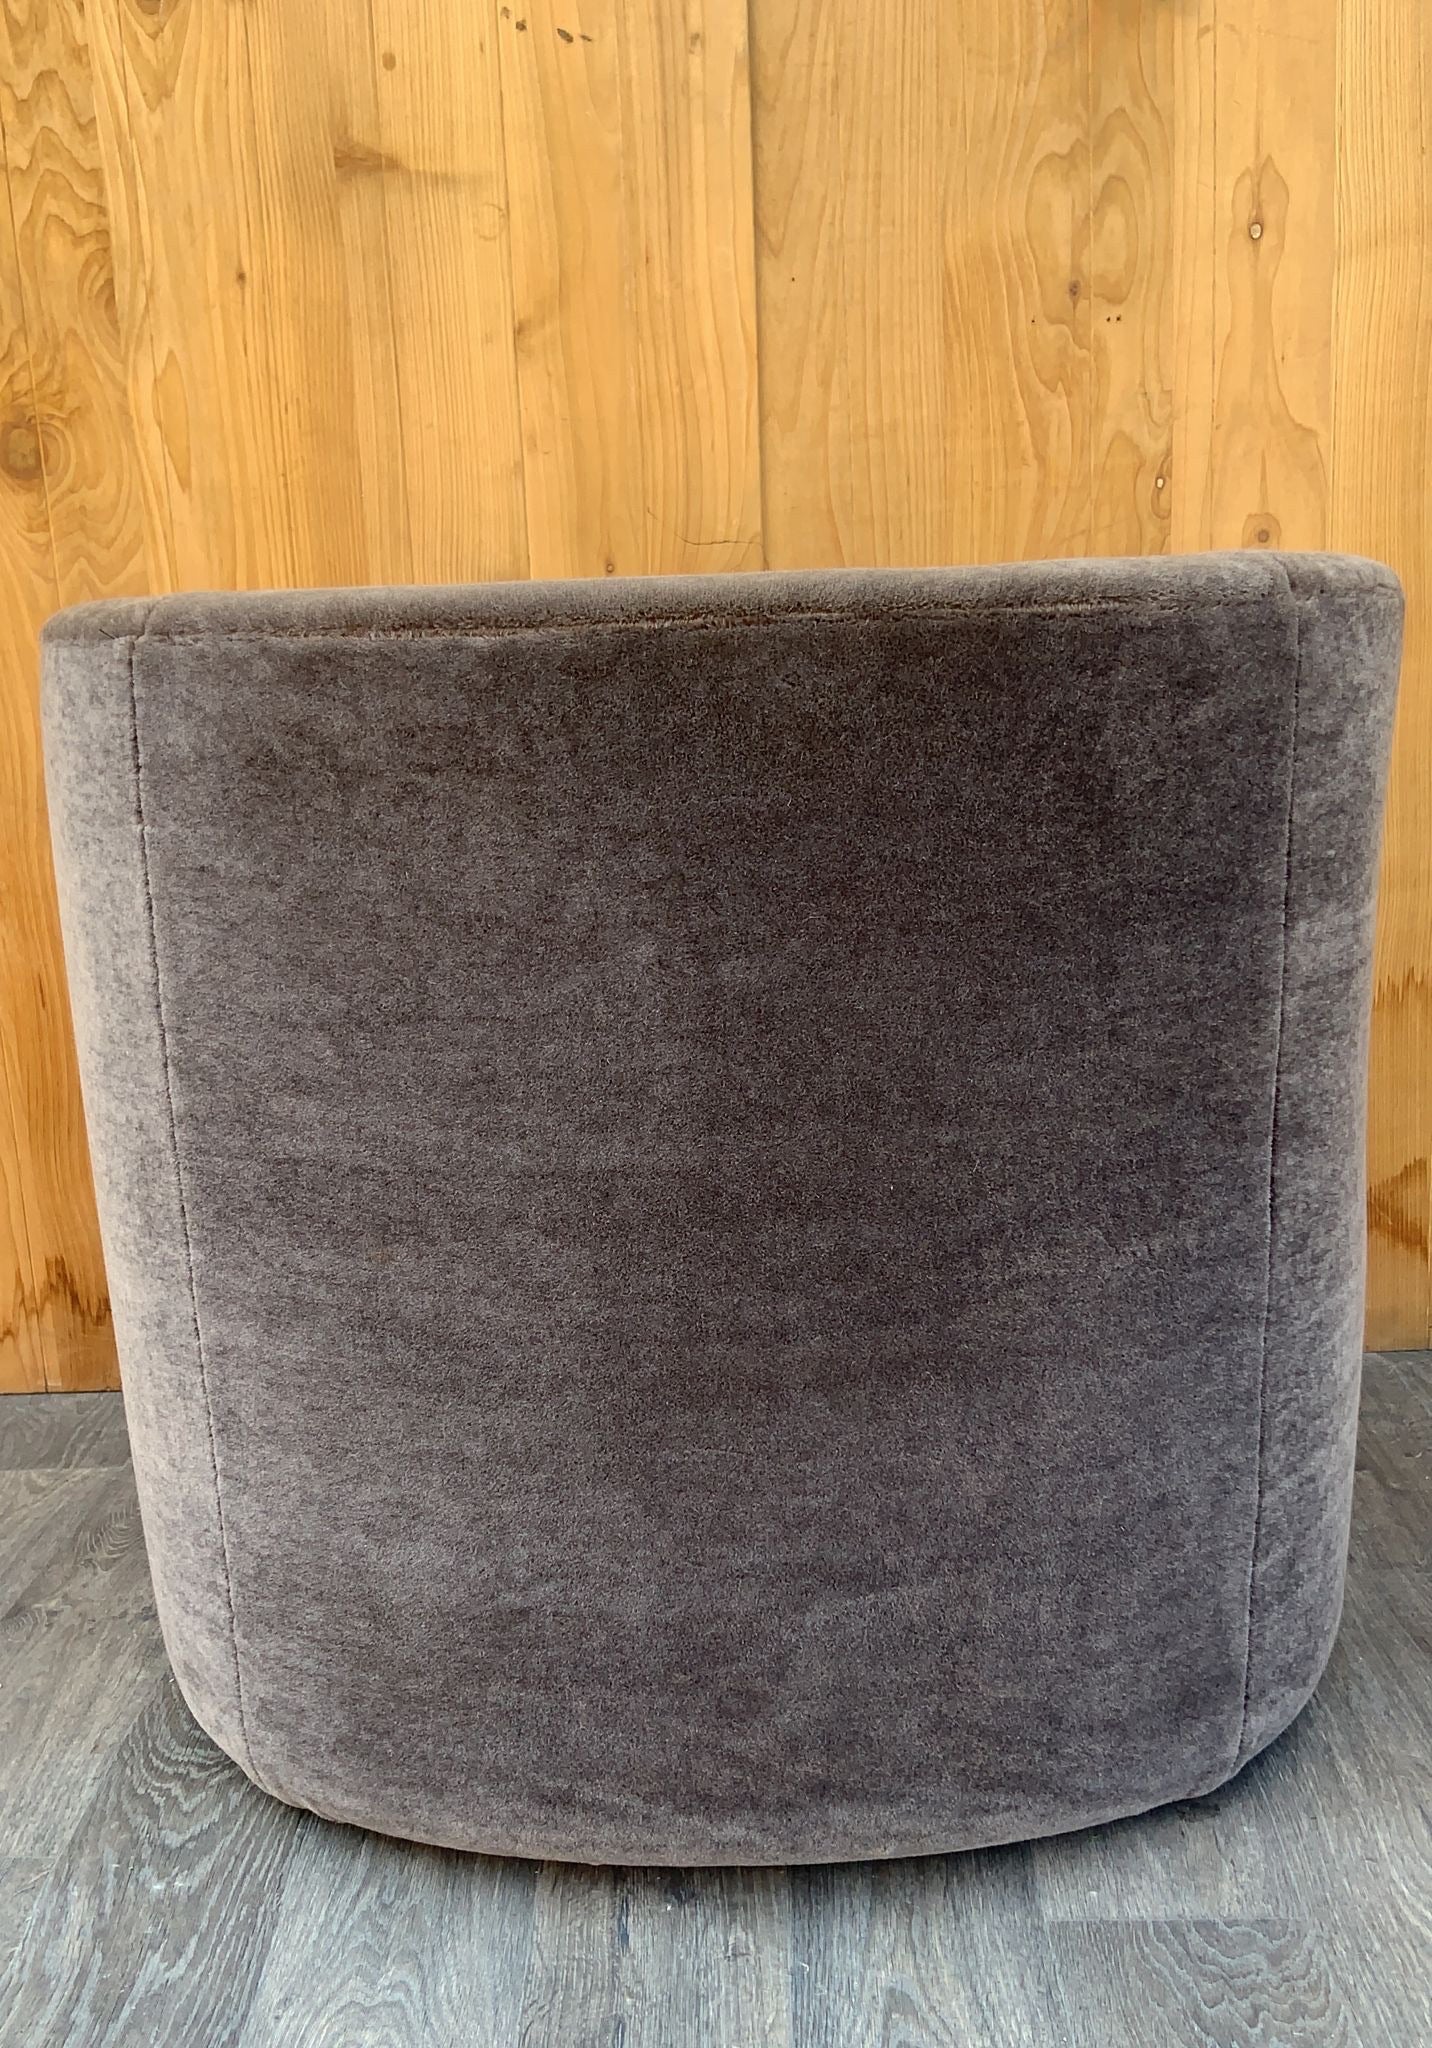 Mid Century Modern Faudet-Harrison Designed Continuous Swivel Tub Lounges for SCP England Newly Upholstered Grey Mohair - Pair